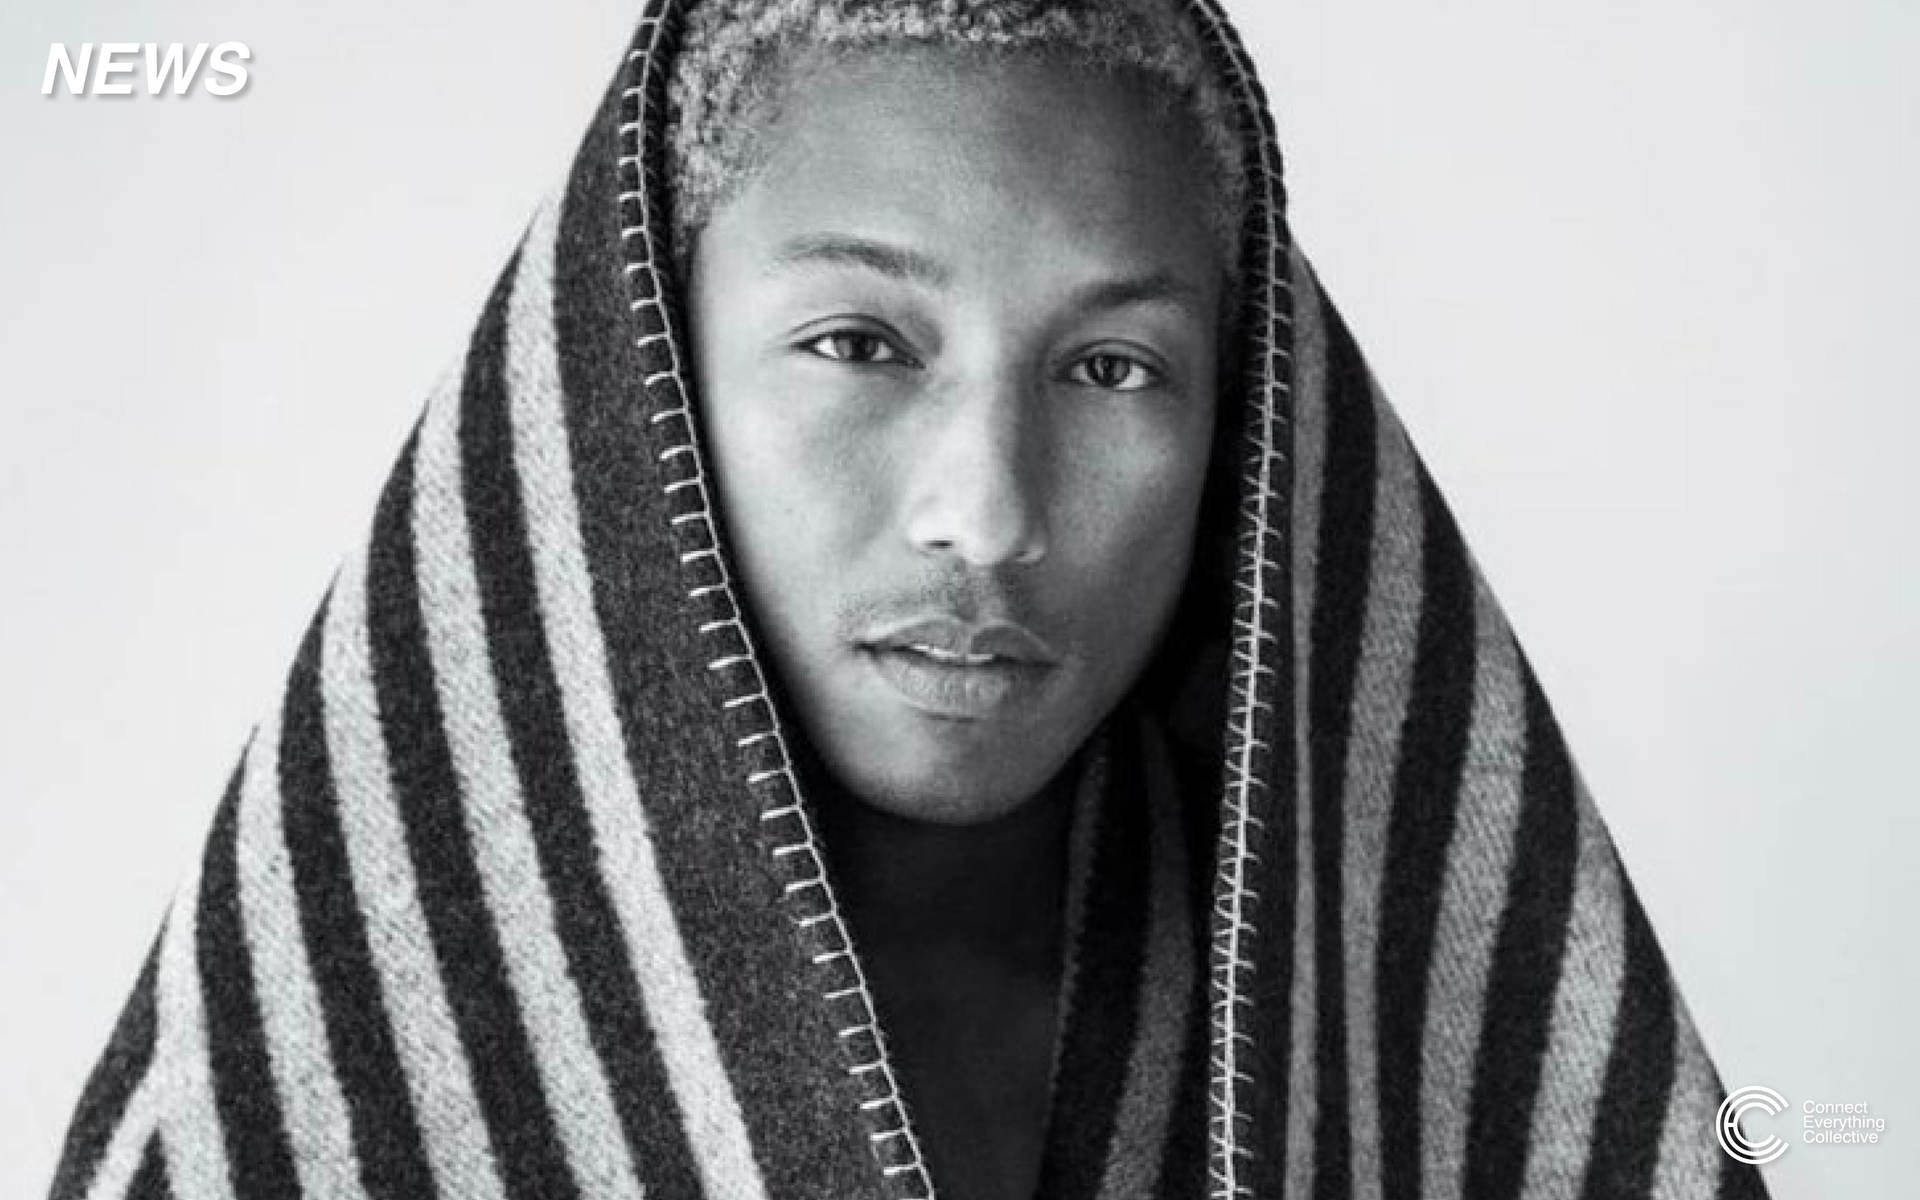 How Pharrell Is Making LV a Cultural Brand & Platform, True to